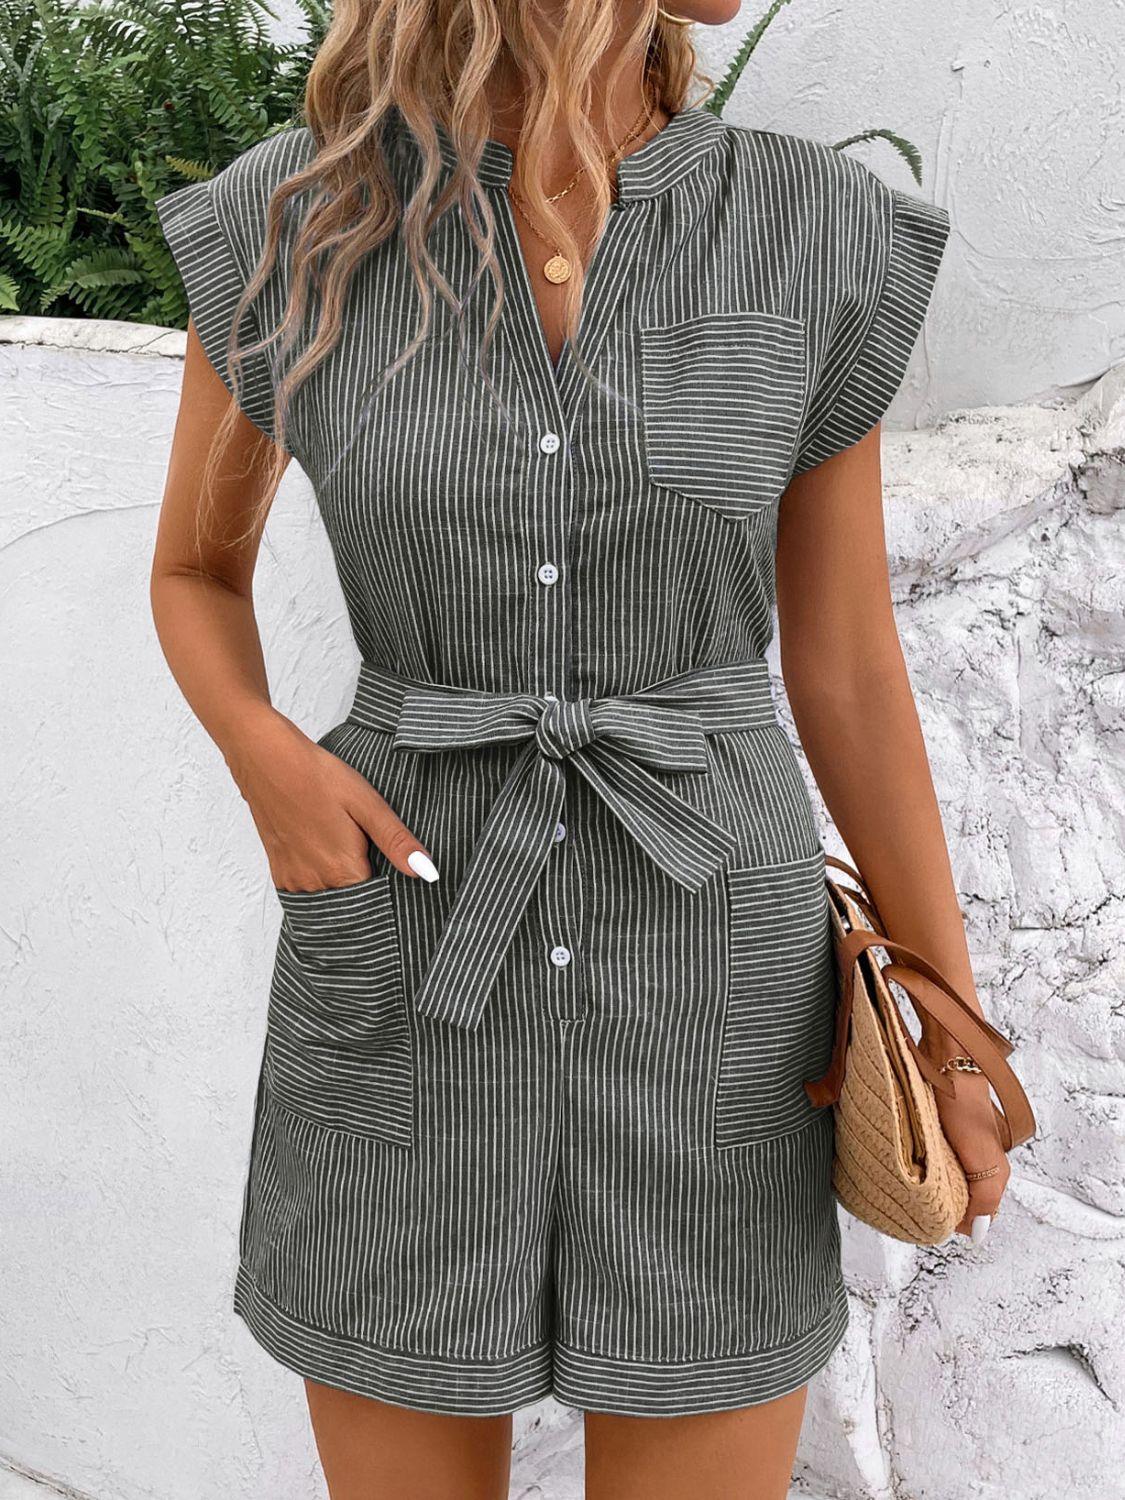 Women's Jumpsuits & Rompers Striped Notched Tie Waist Romper